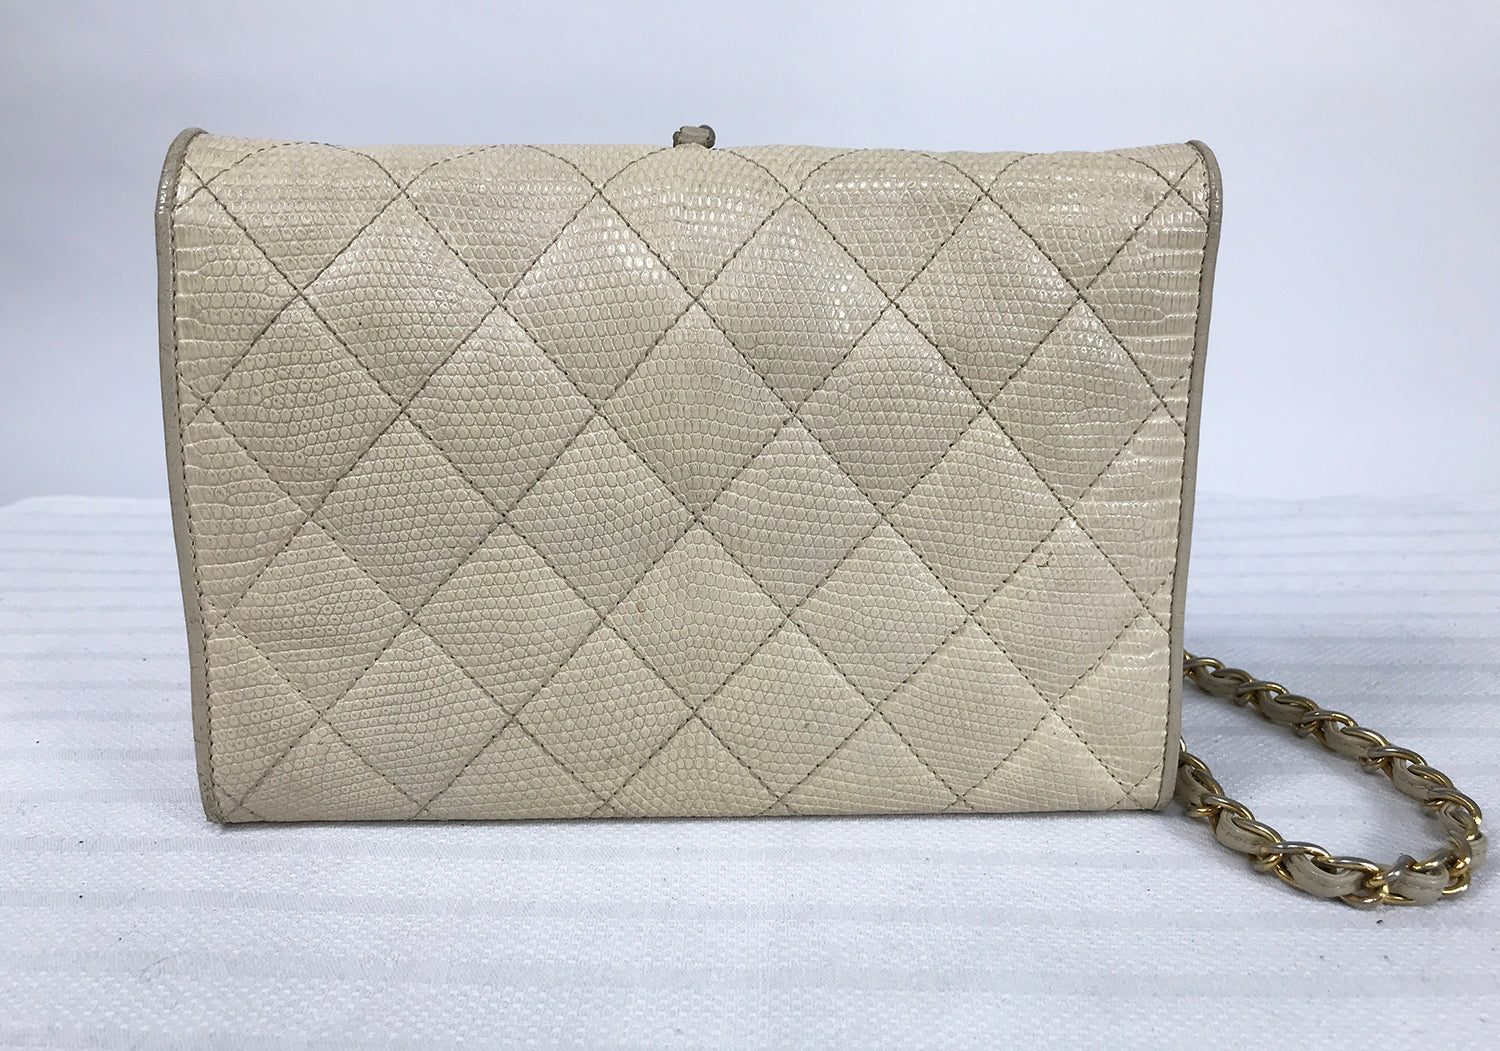 Chanel Throw Taupe/Cream 